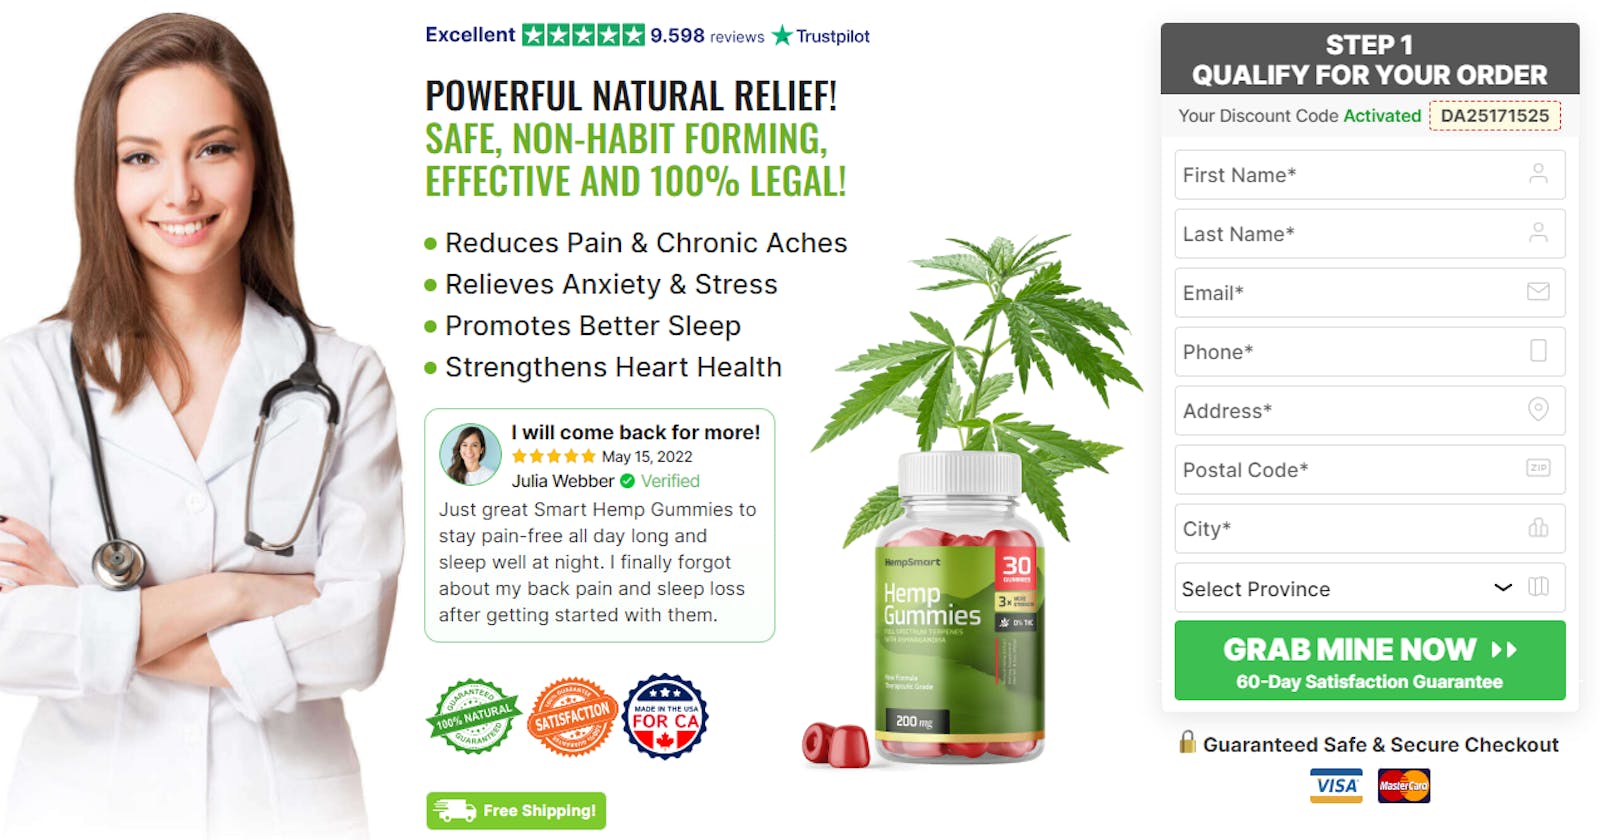 Everhempz CBD Gummies Canada Reviews, Side Effects, Near Me, Amazon, Cost, Price, Reddit, Scam & Where To Buy?